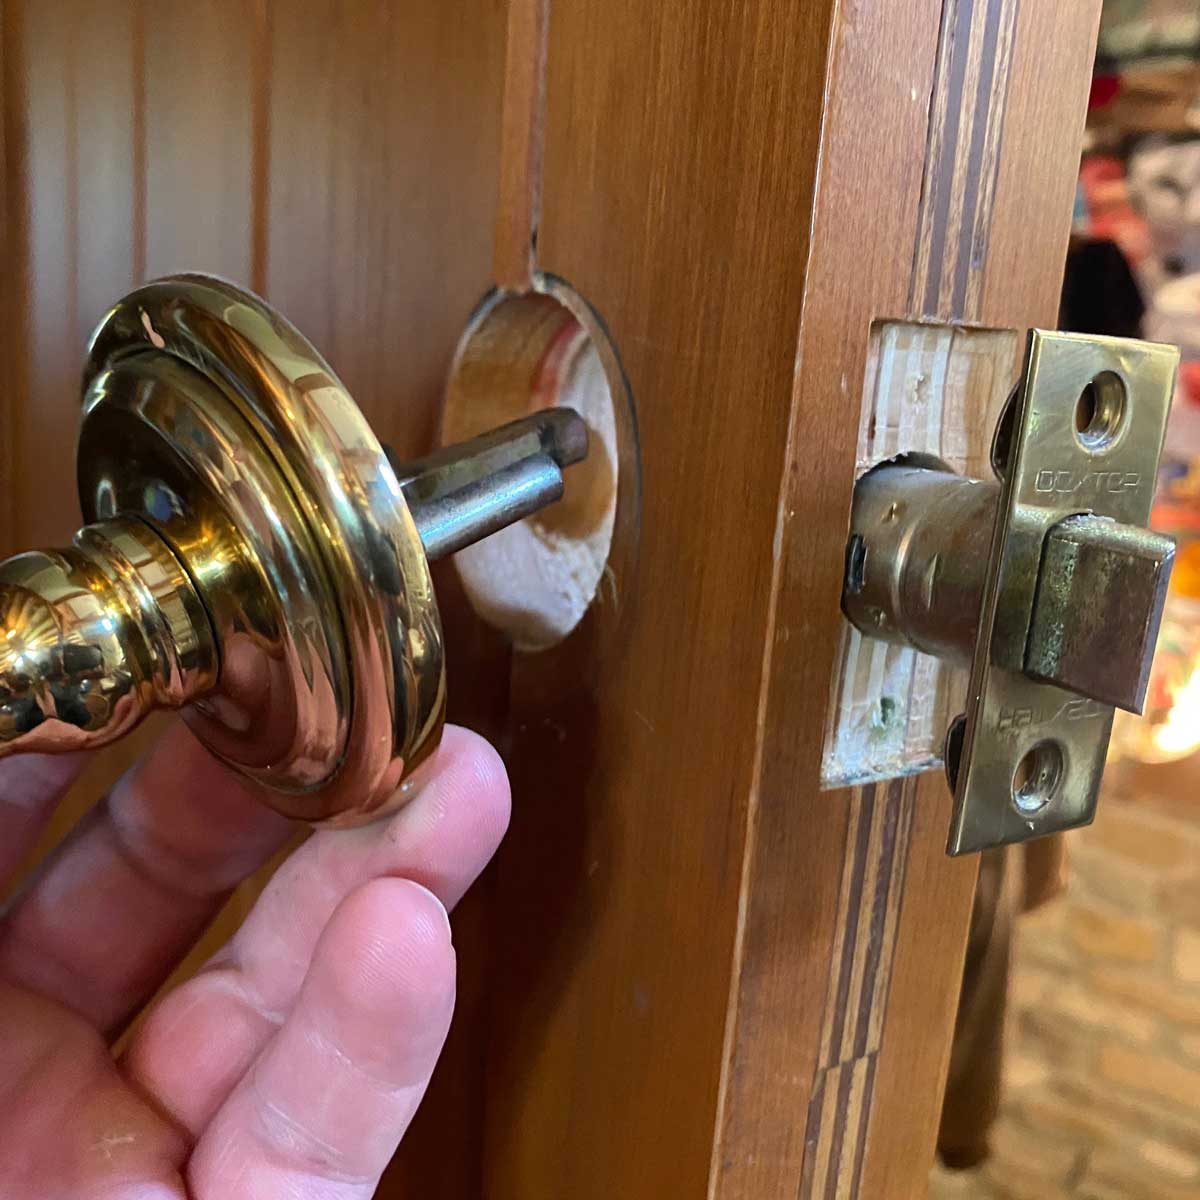 How to Change a Doorknob Quickly for an Updated Look